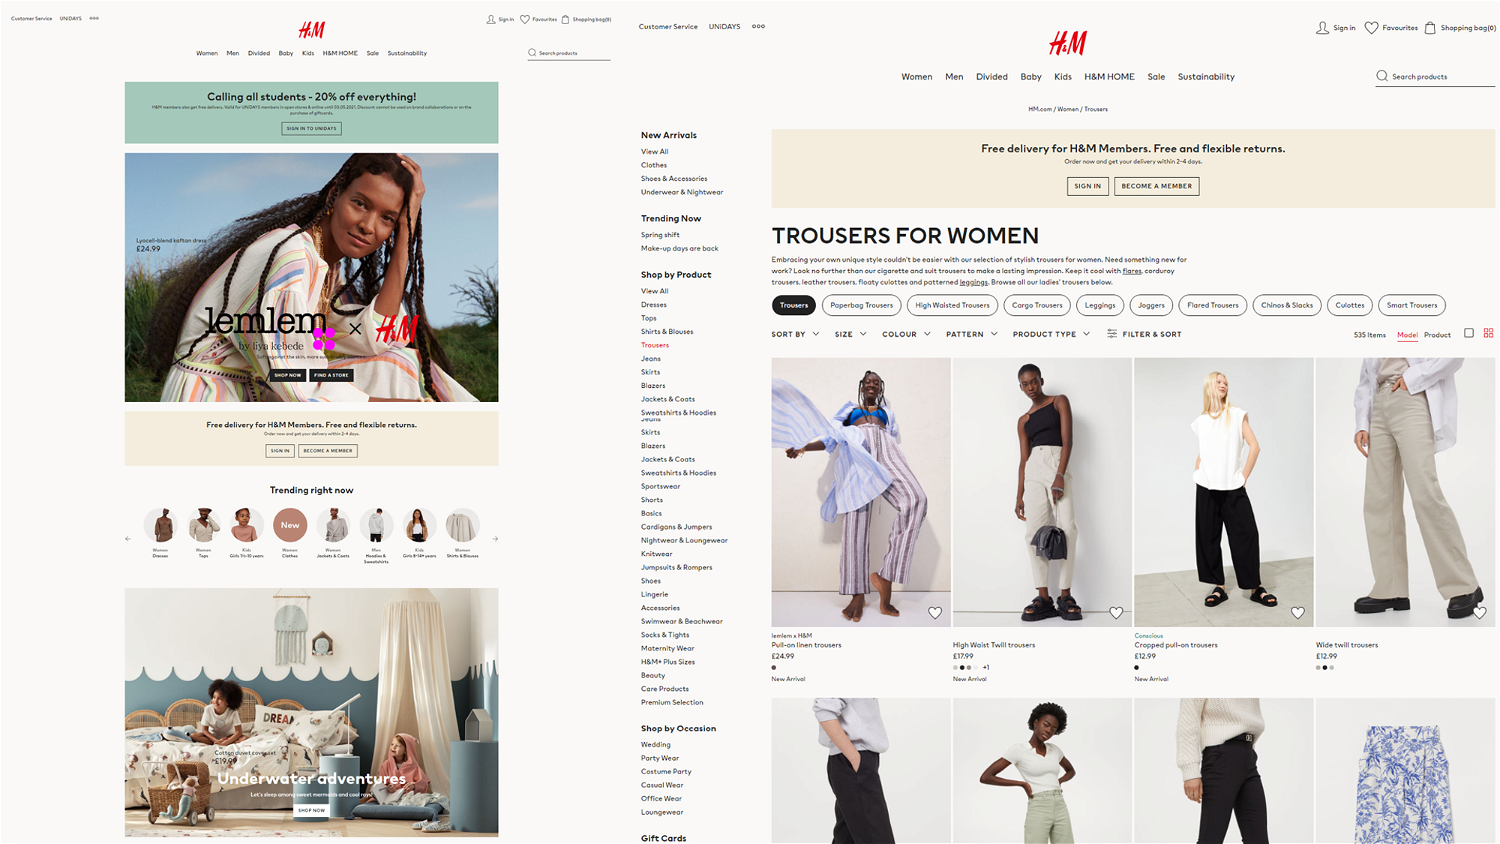 H&M's desktop website. Home page (left) and category page (right)